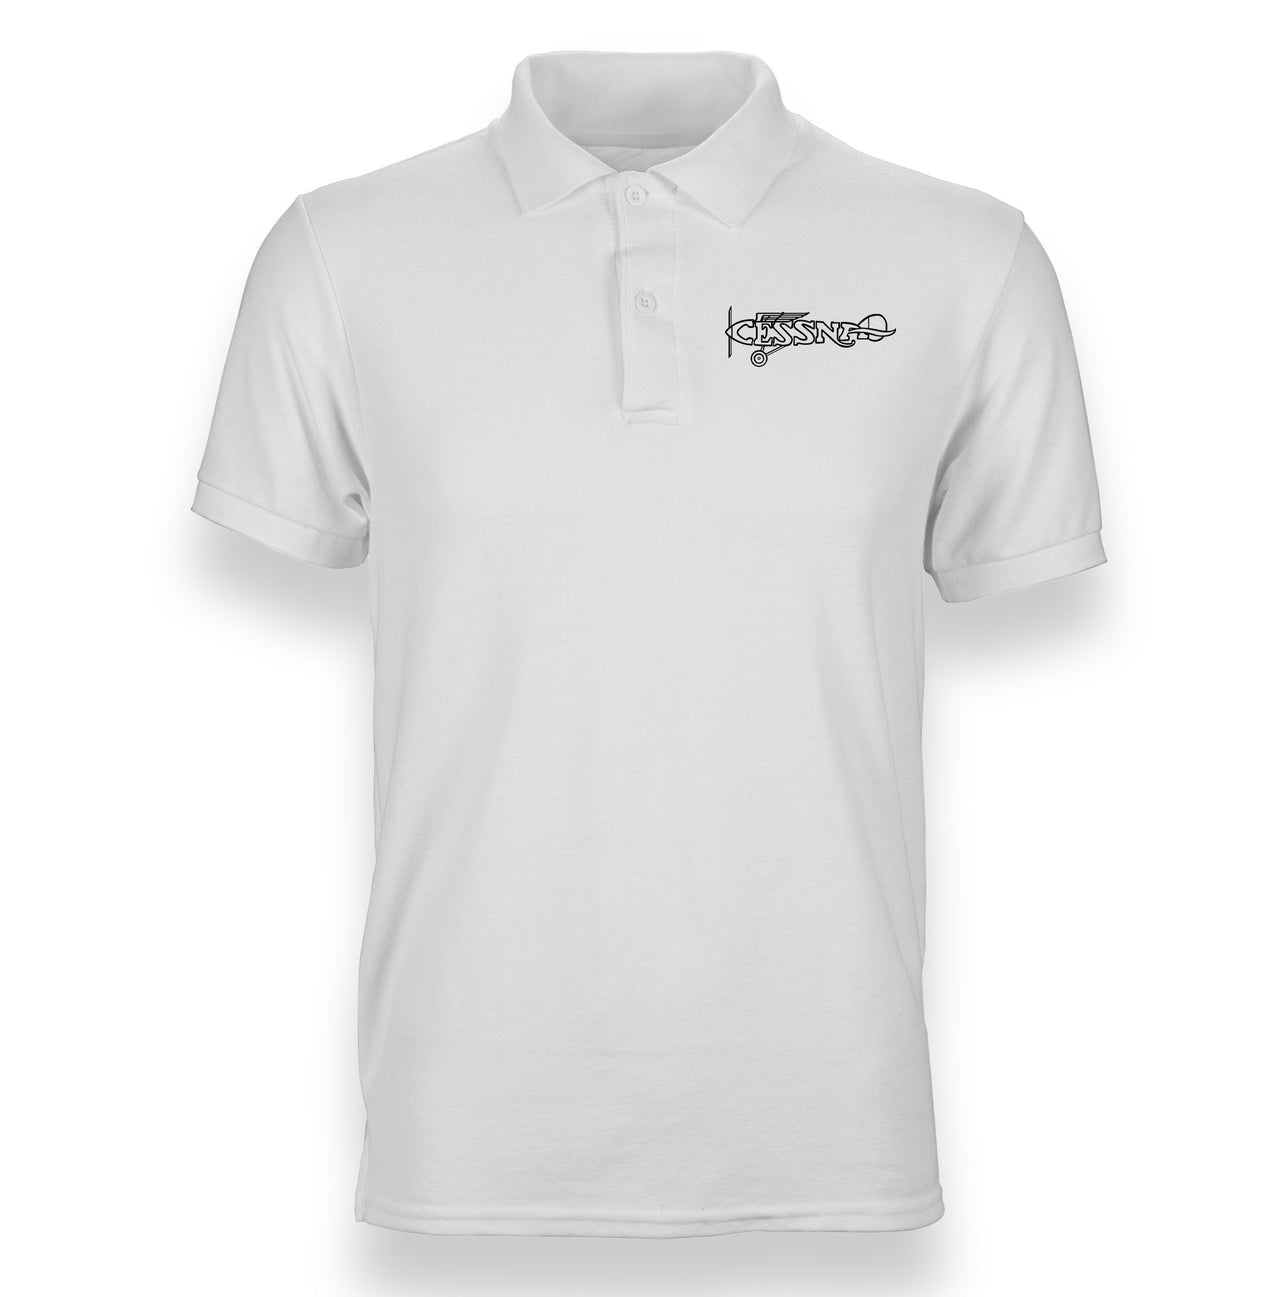 Special Cessna Text Designed Polo T-Shirts